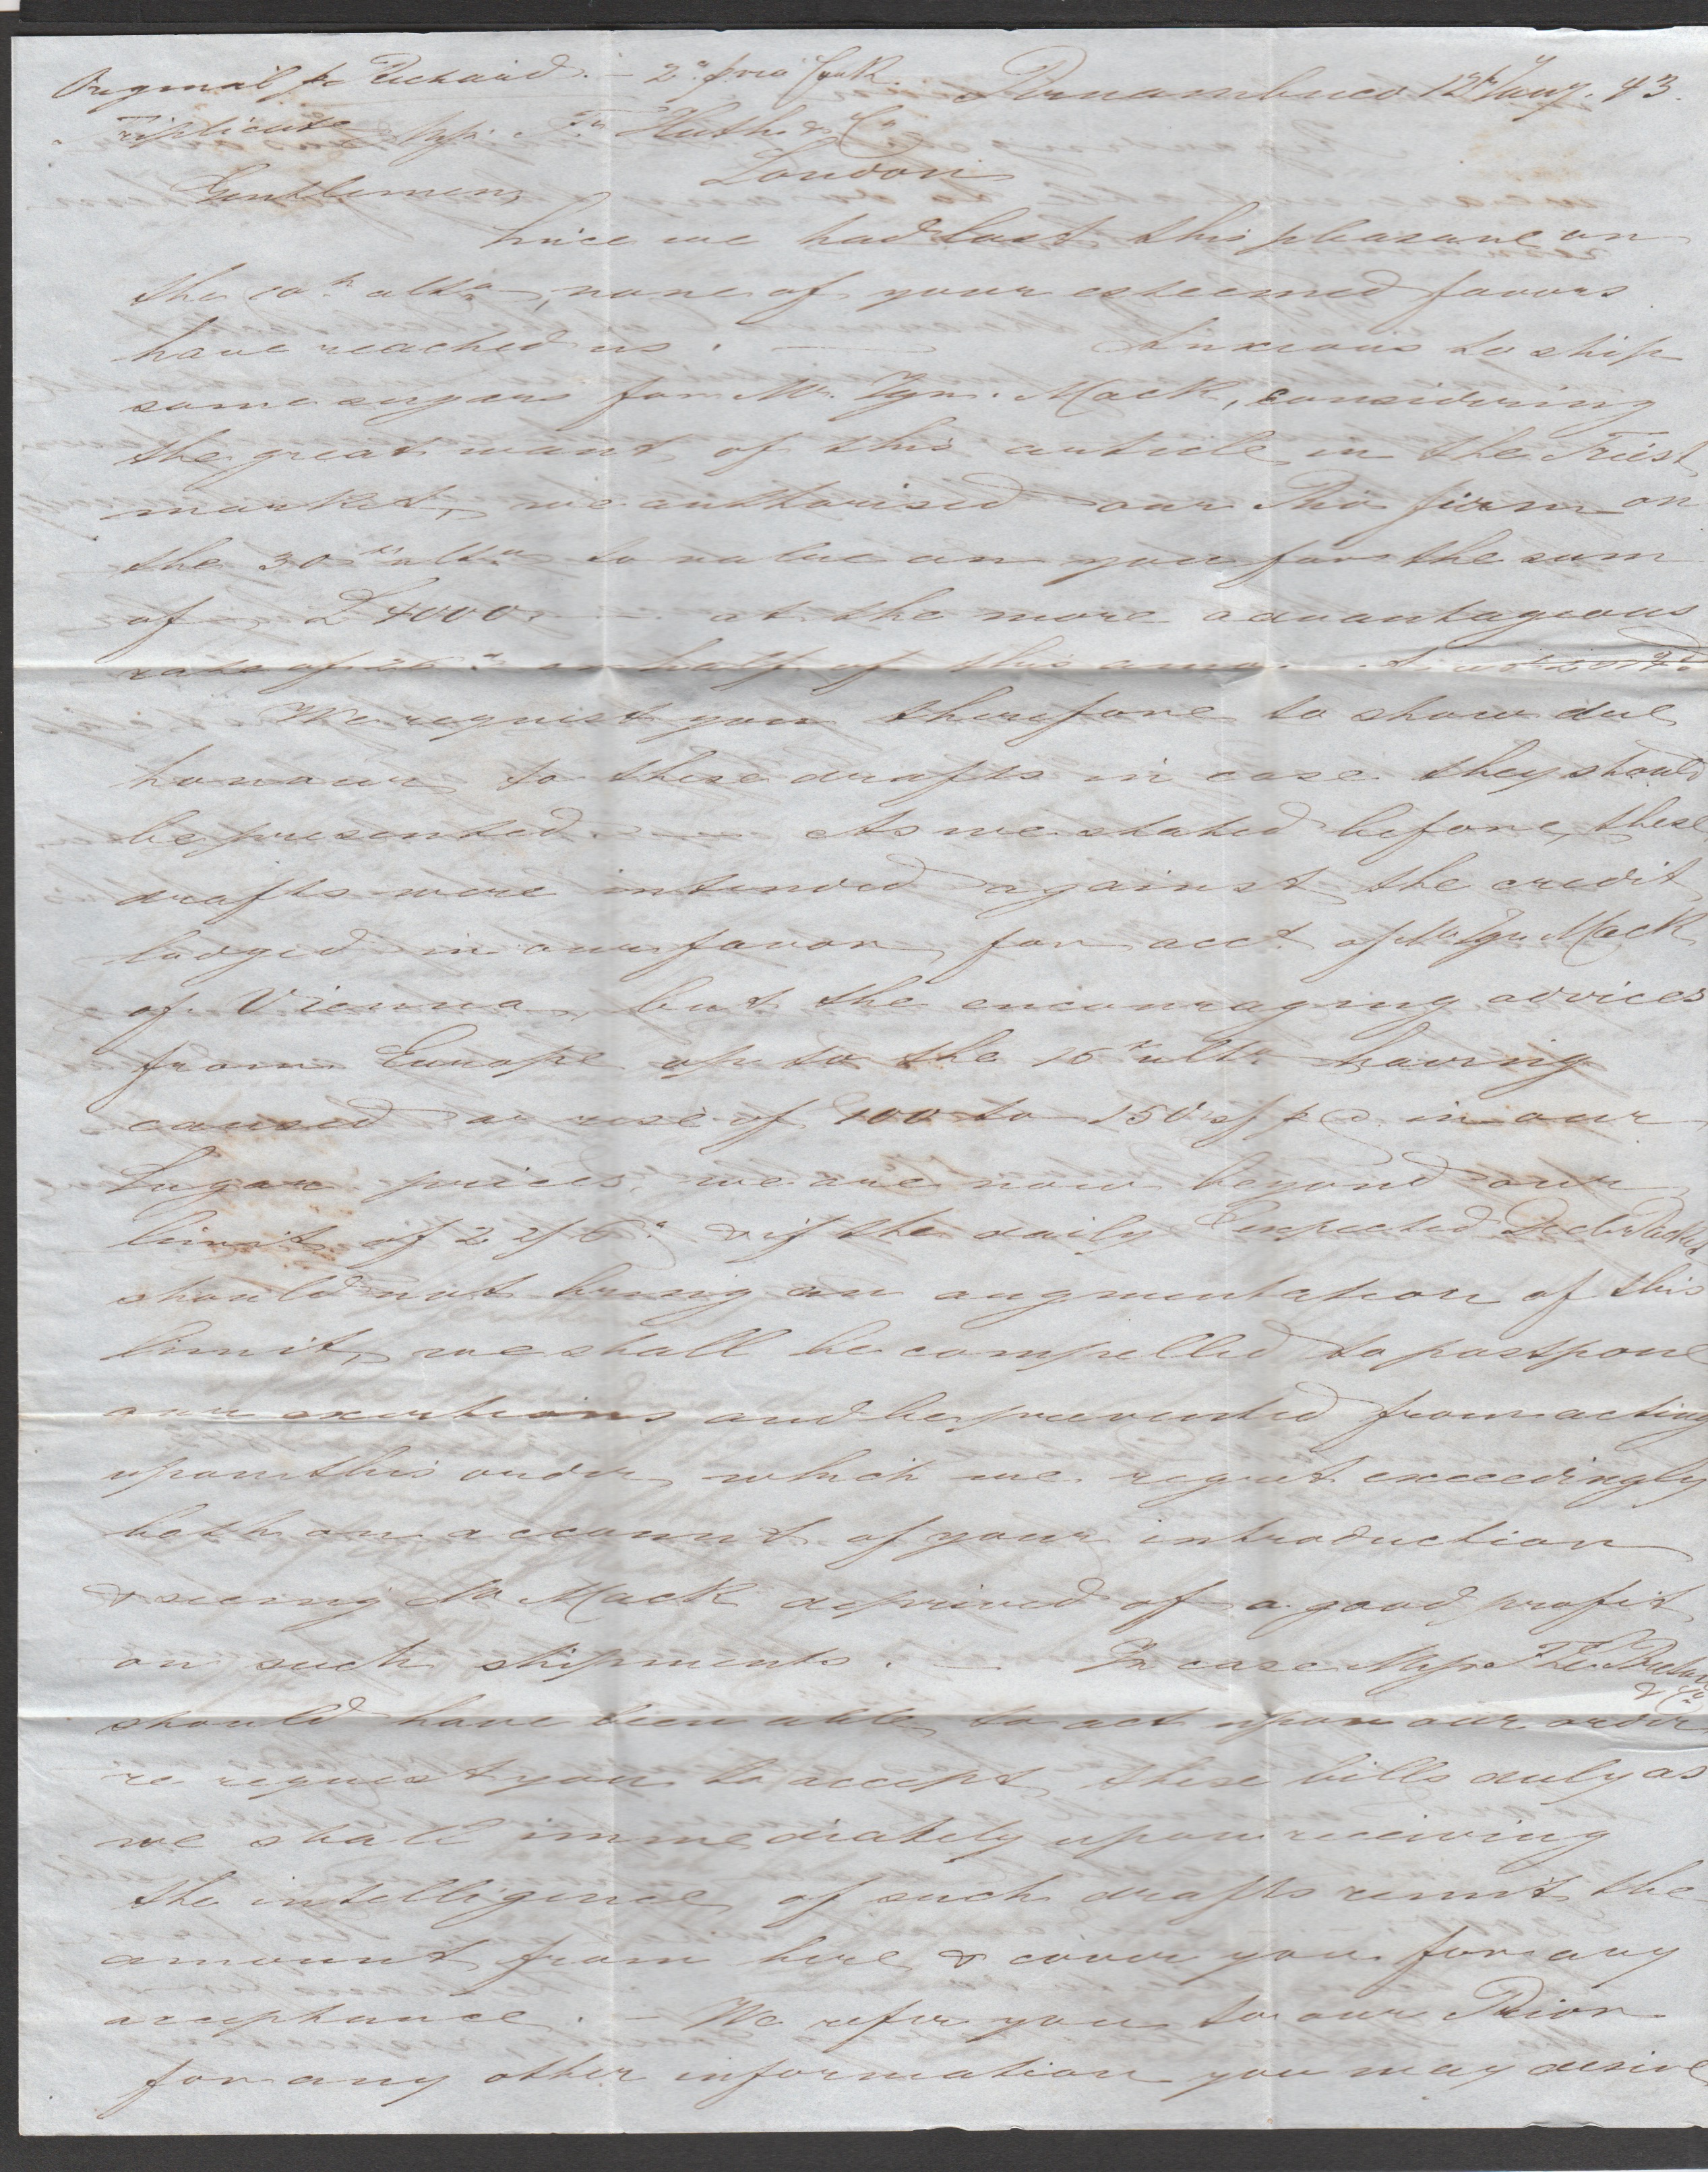 G.B. - Ireland - Ship Letters 1842 Entire Letter from Pernambuco to London, landed at Cork and hands - Image 6 of 7